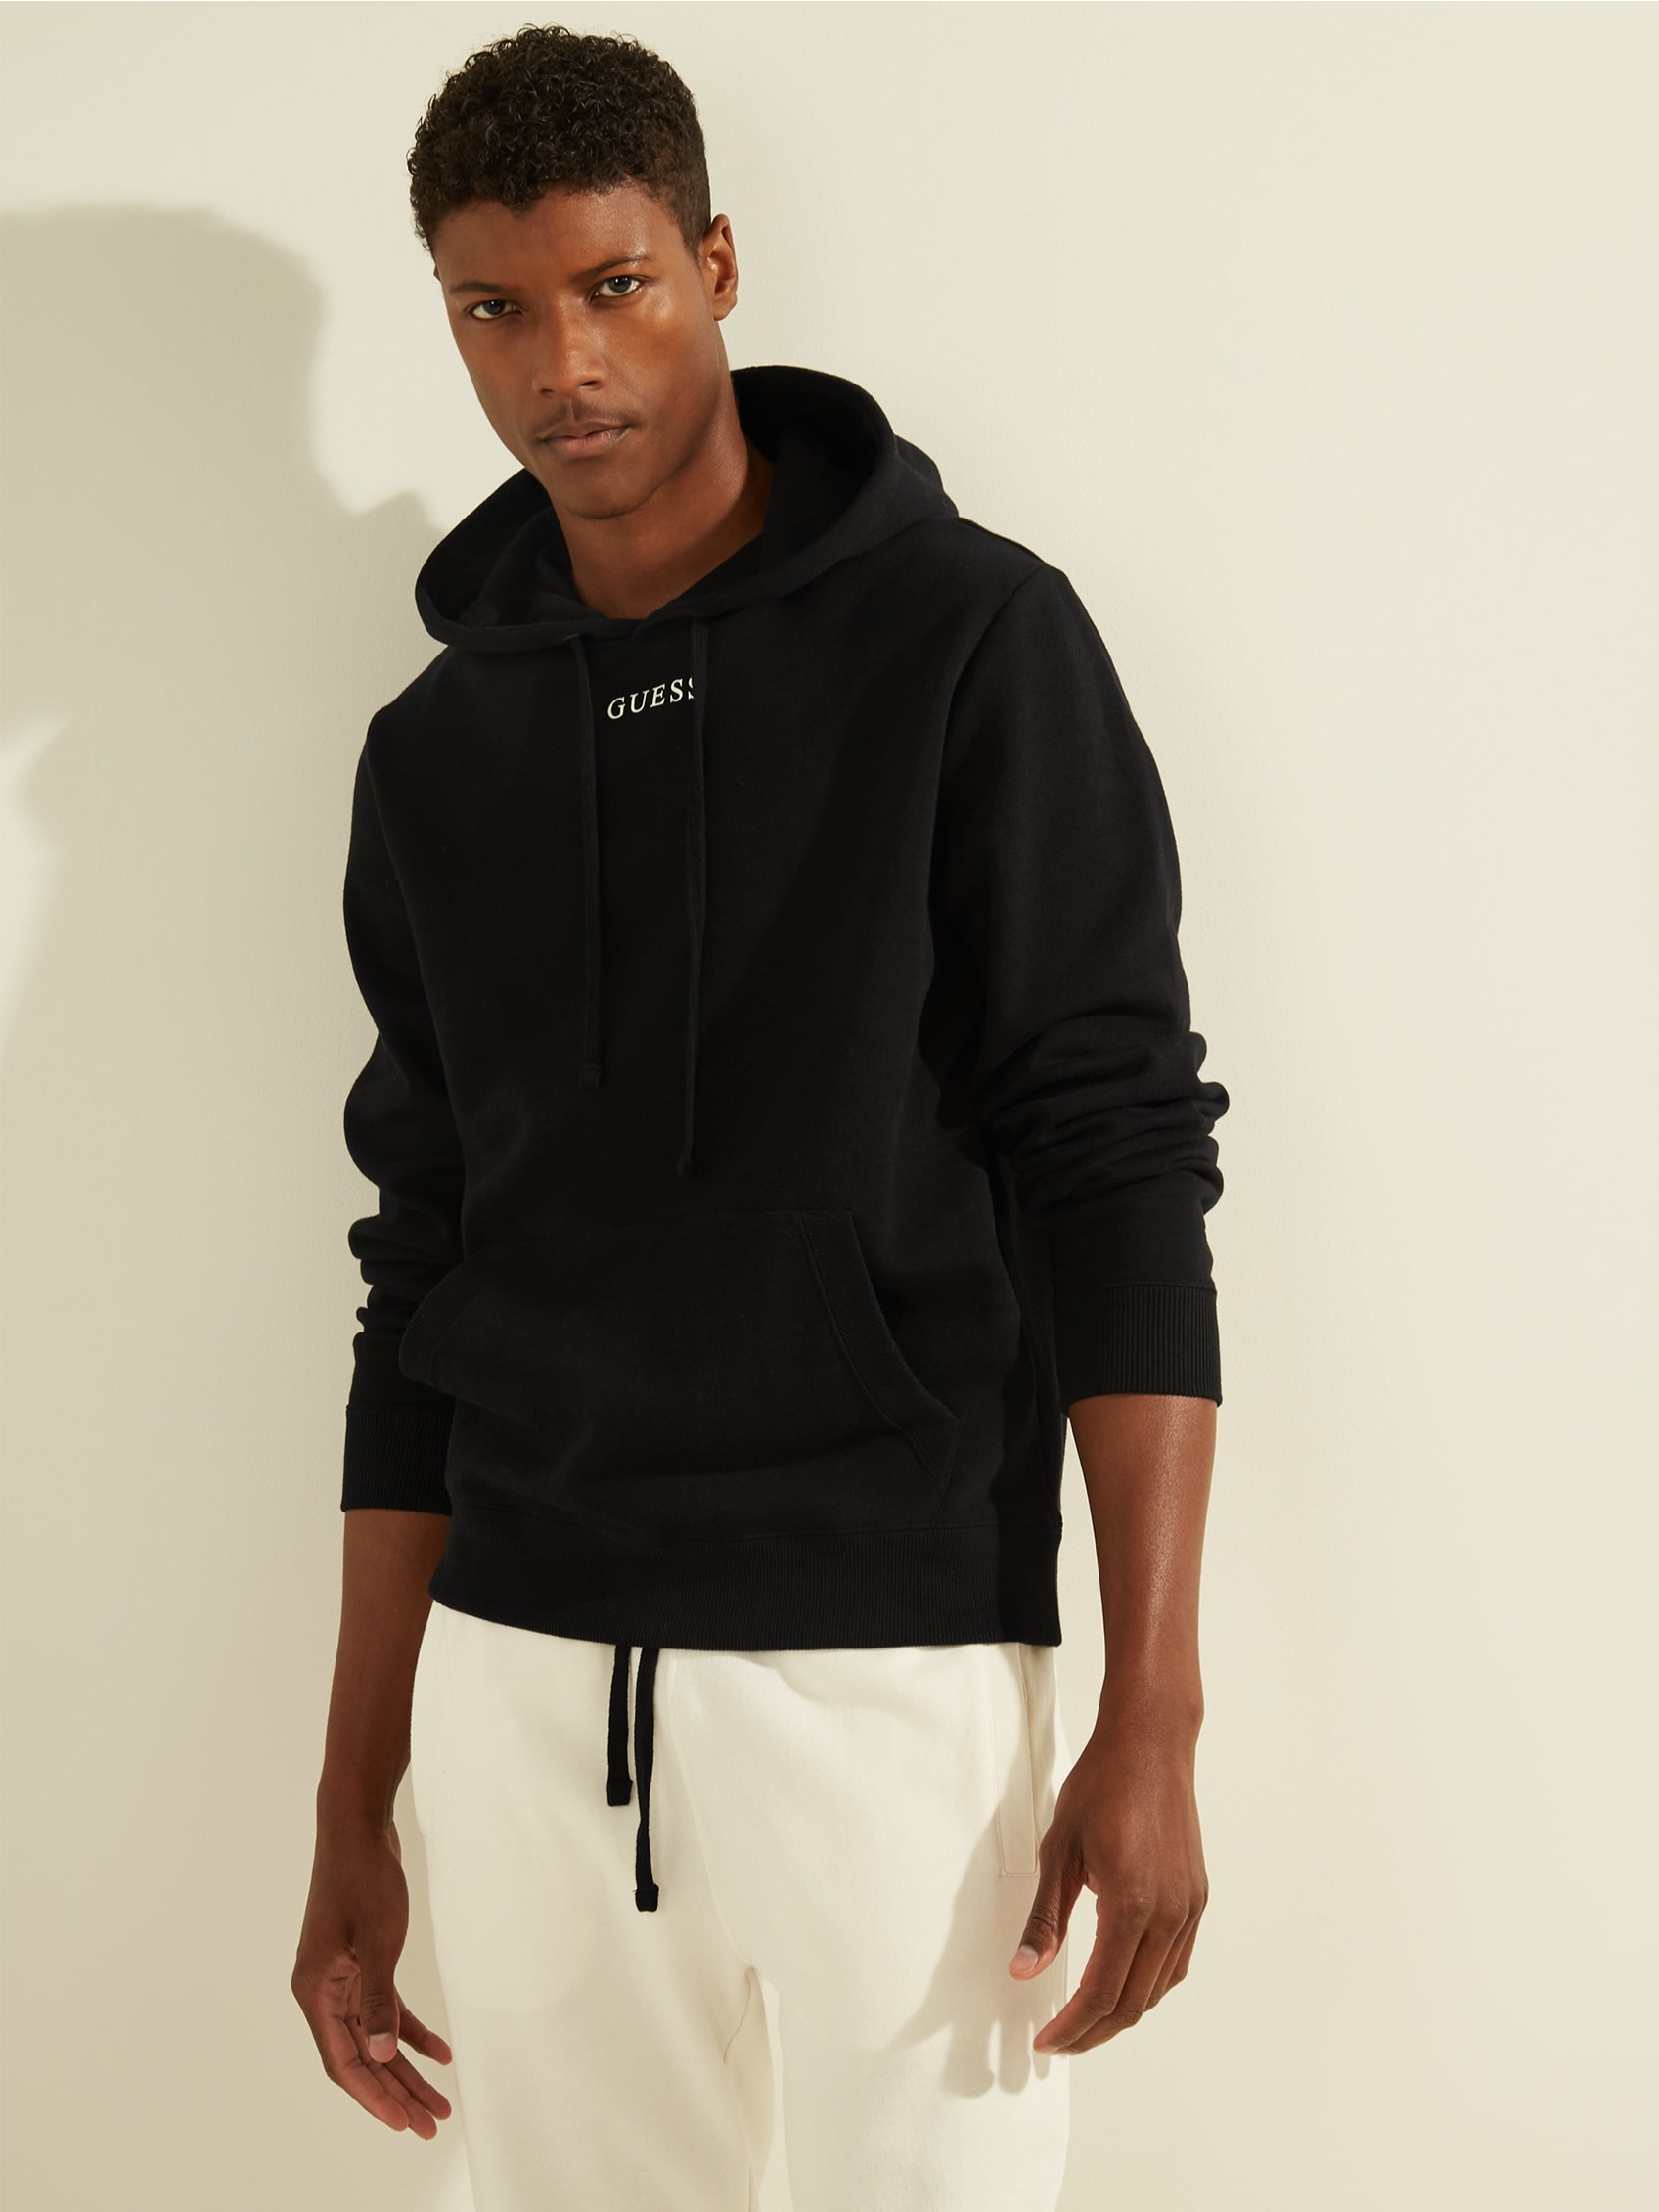 ROY GUESS HOODIE | Guess Philippines